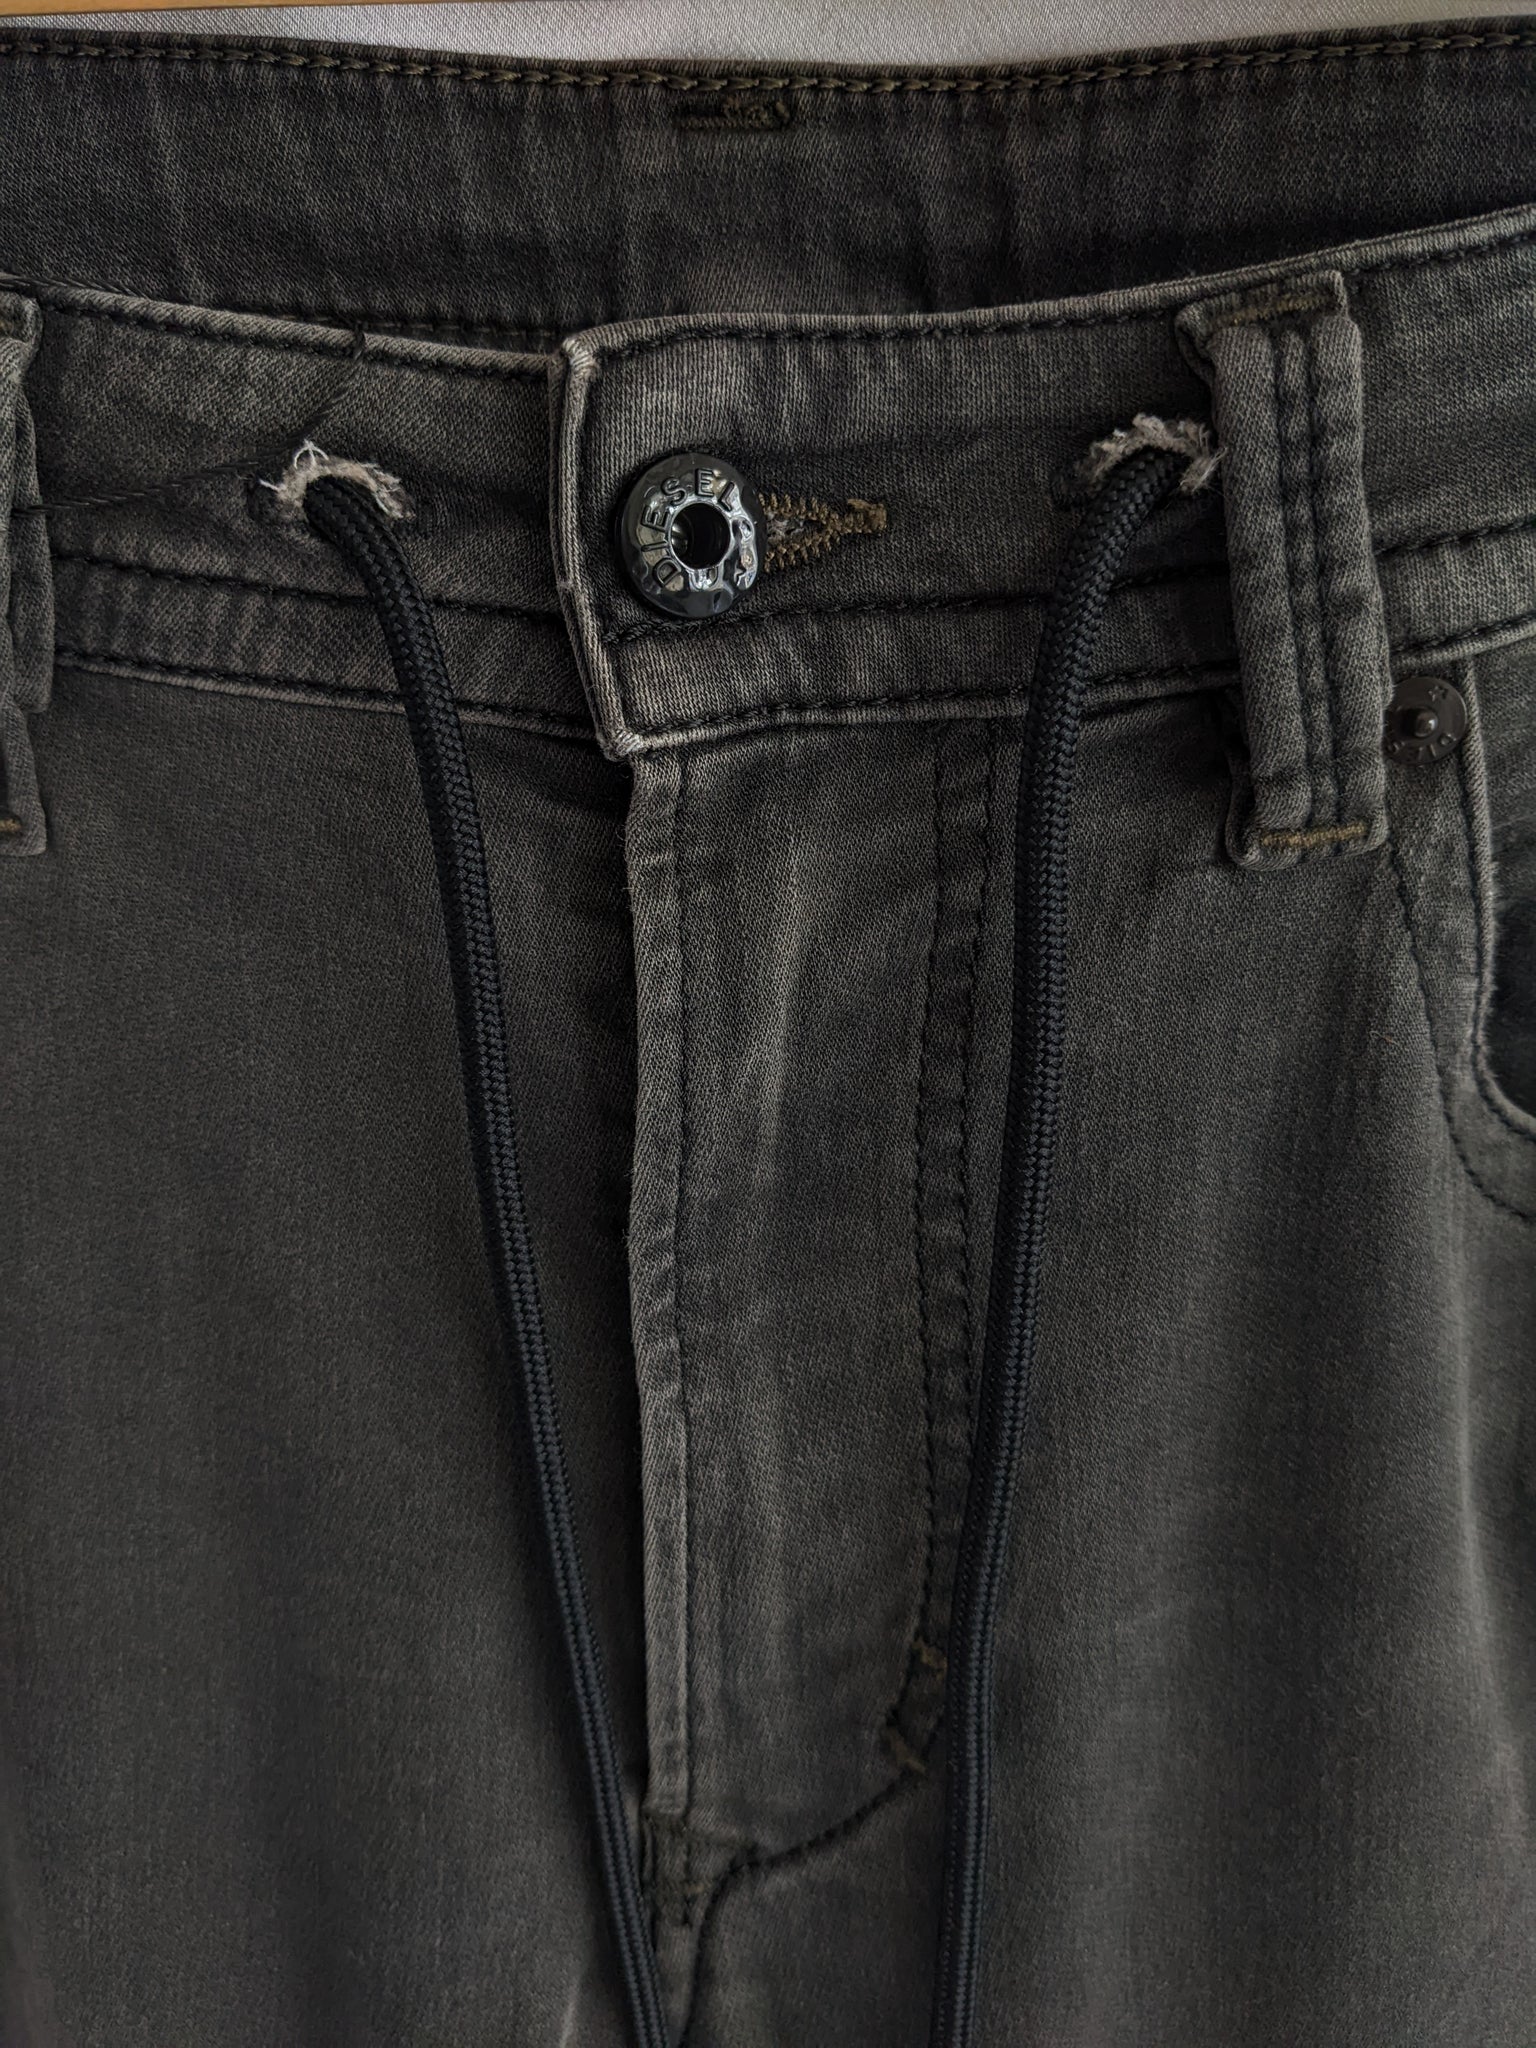 Diesel Is Selling VirusFighting Denim but Experts Say Its a Gimmick